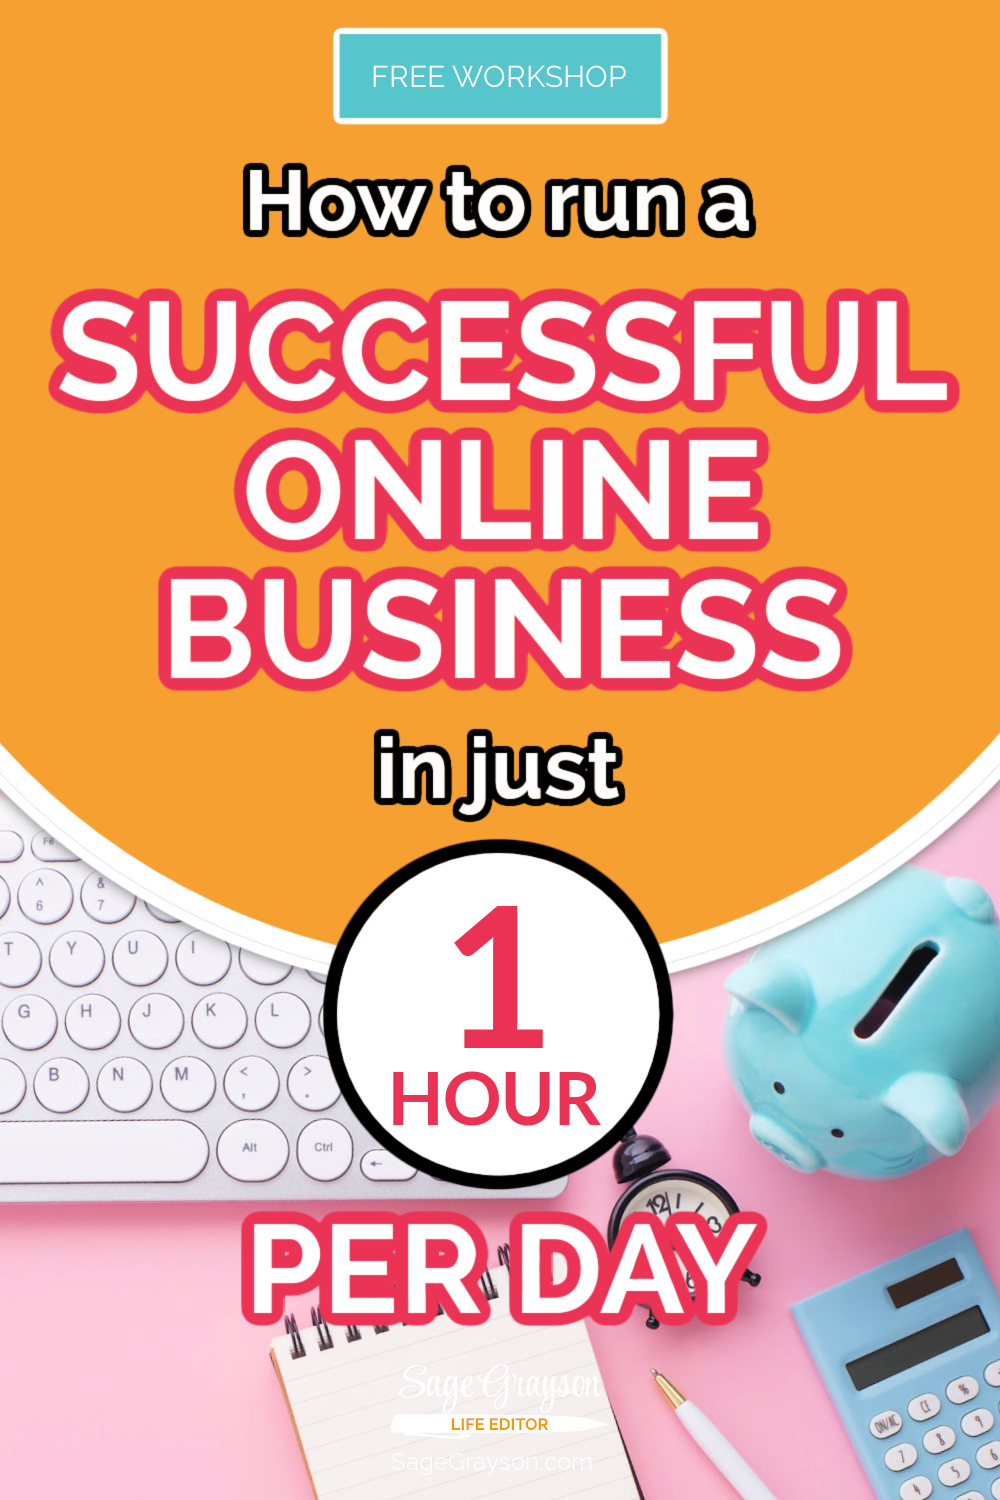 How to Run a Successful Online Business In Just 1 Hour Per Day